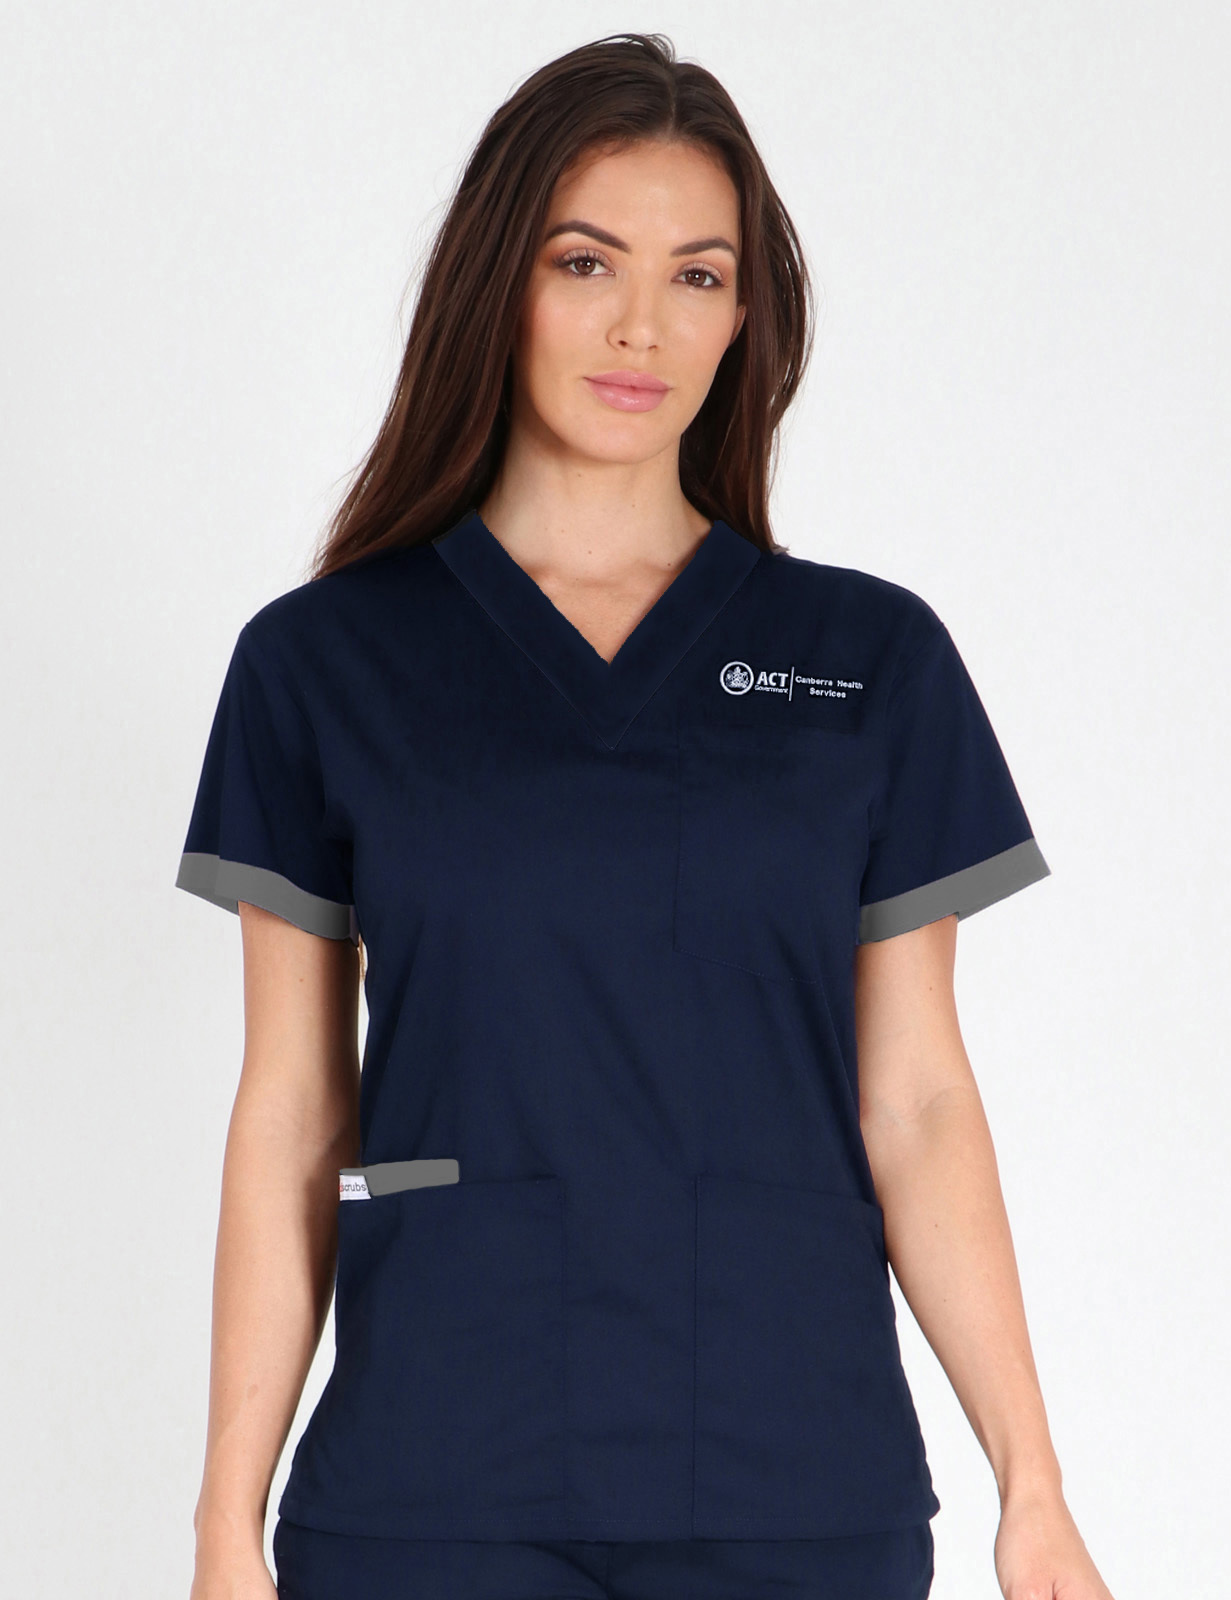 Canberra Hospital (ACT) - Acute Social Work (Contrast 4 Pkt in Navy with Steel Grey Trim (Sleeves and Inner pocket only) incl Logos)